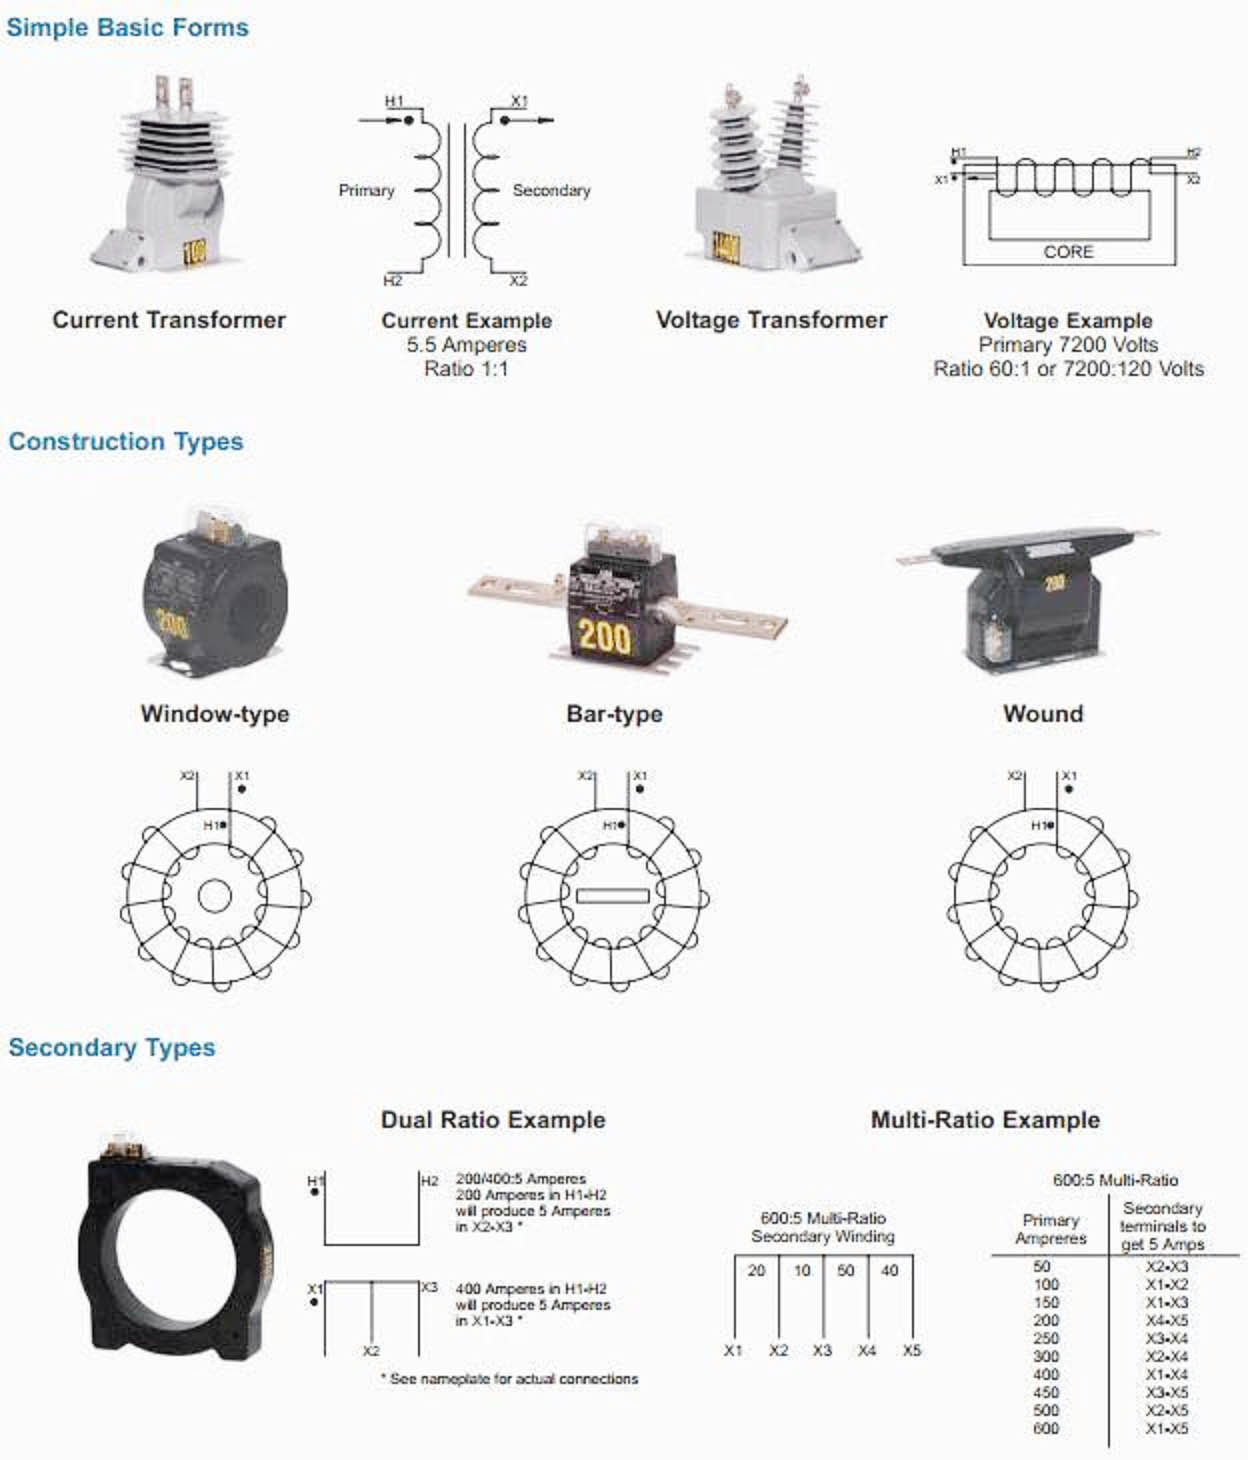 Types of engineering. Transformers Constructions. Types of Electric Transformer. Transformer winding Types. Construction current Transformer.